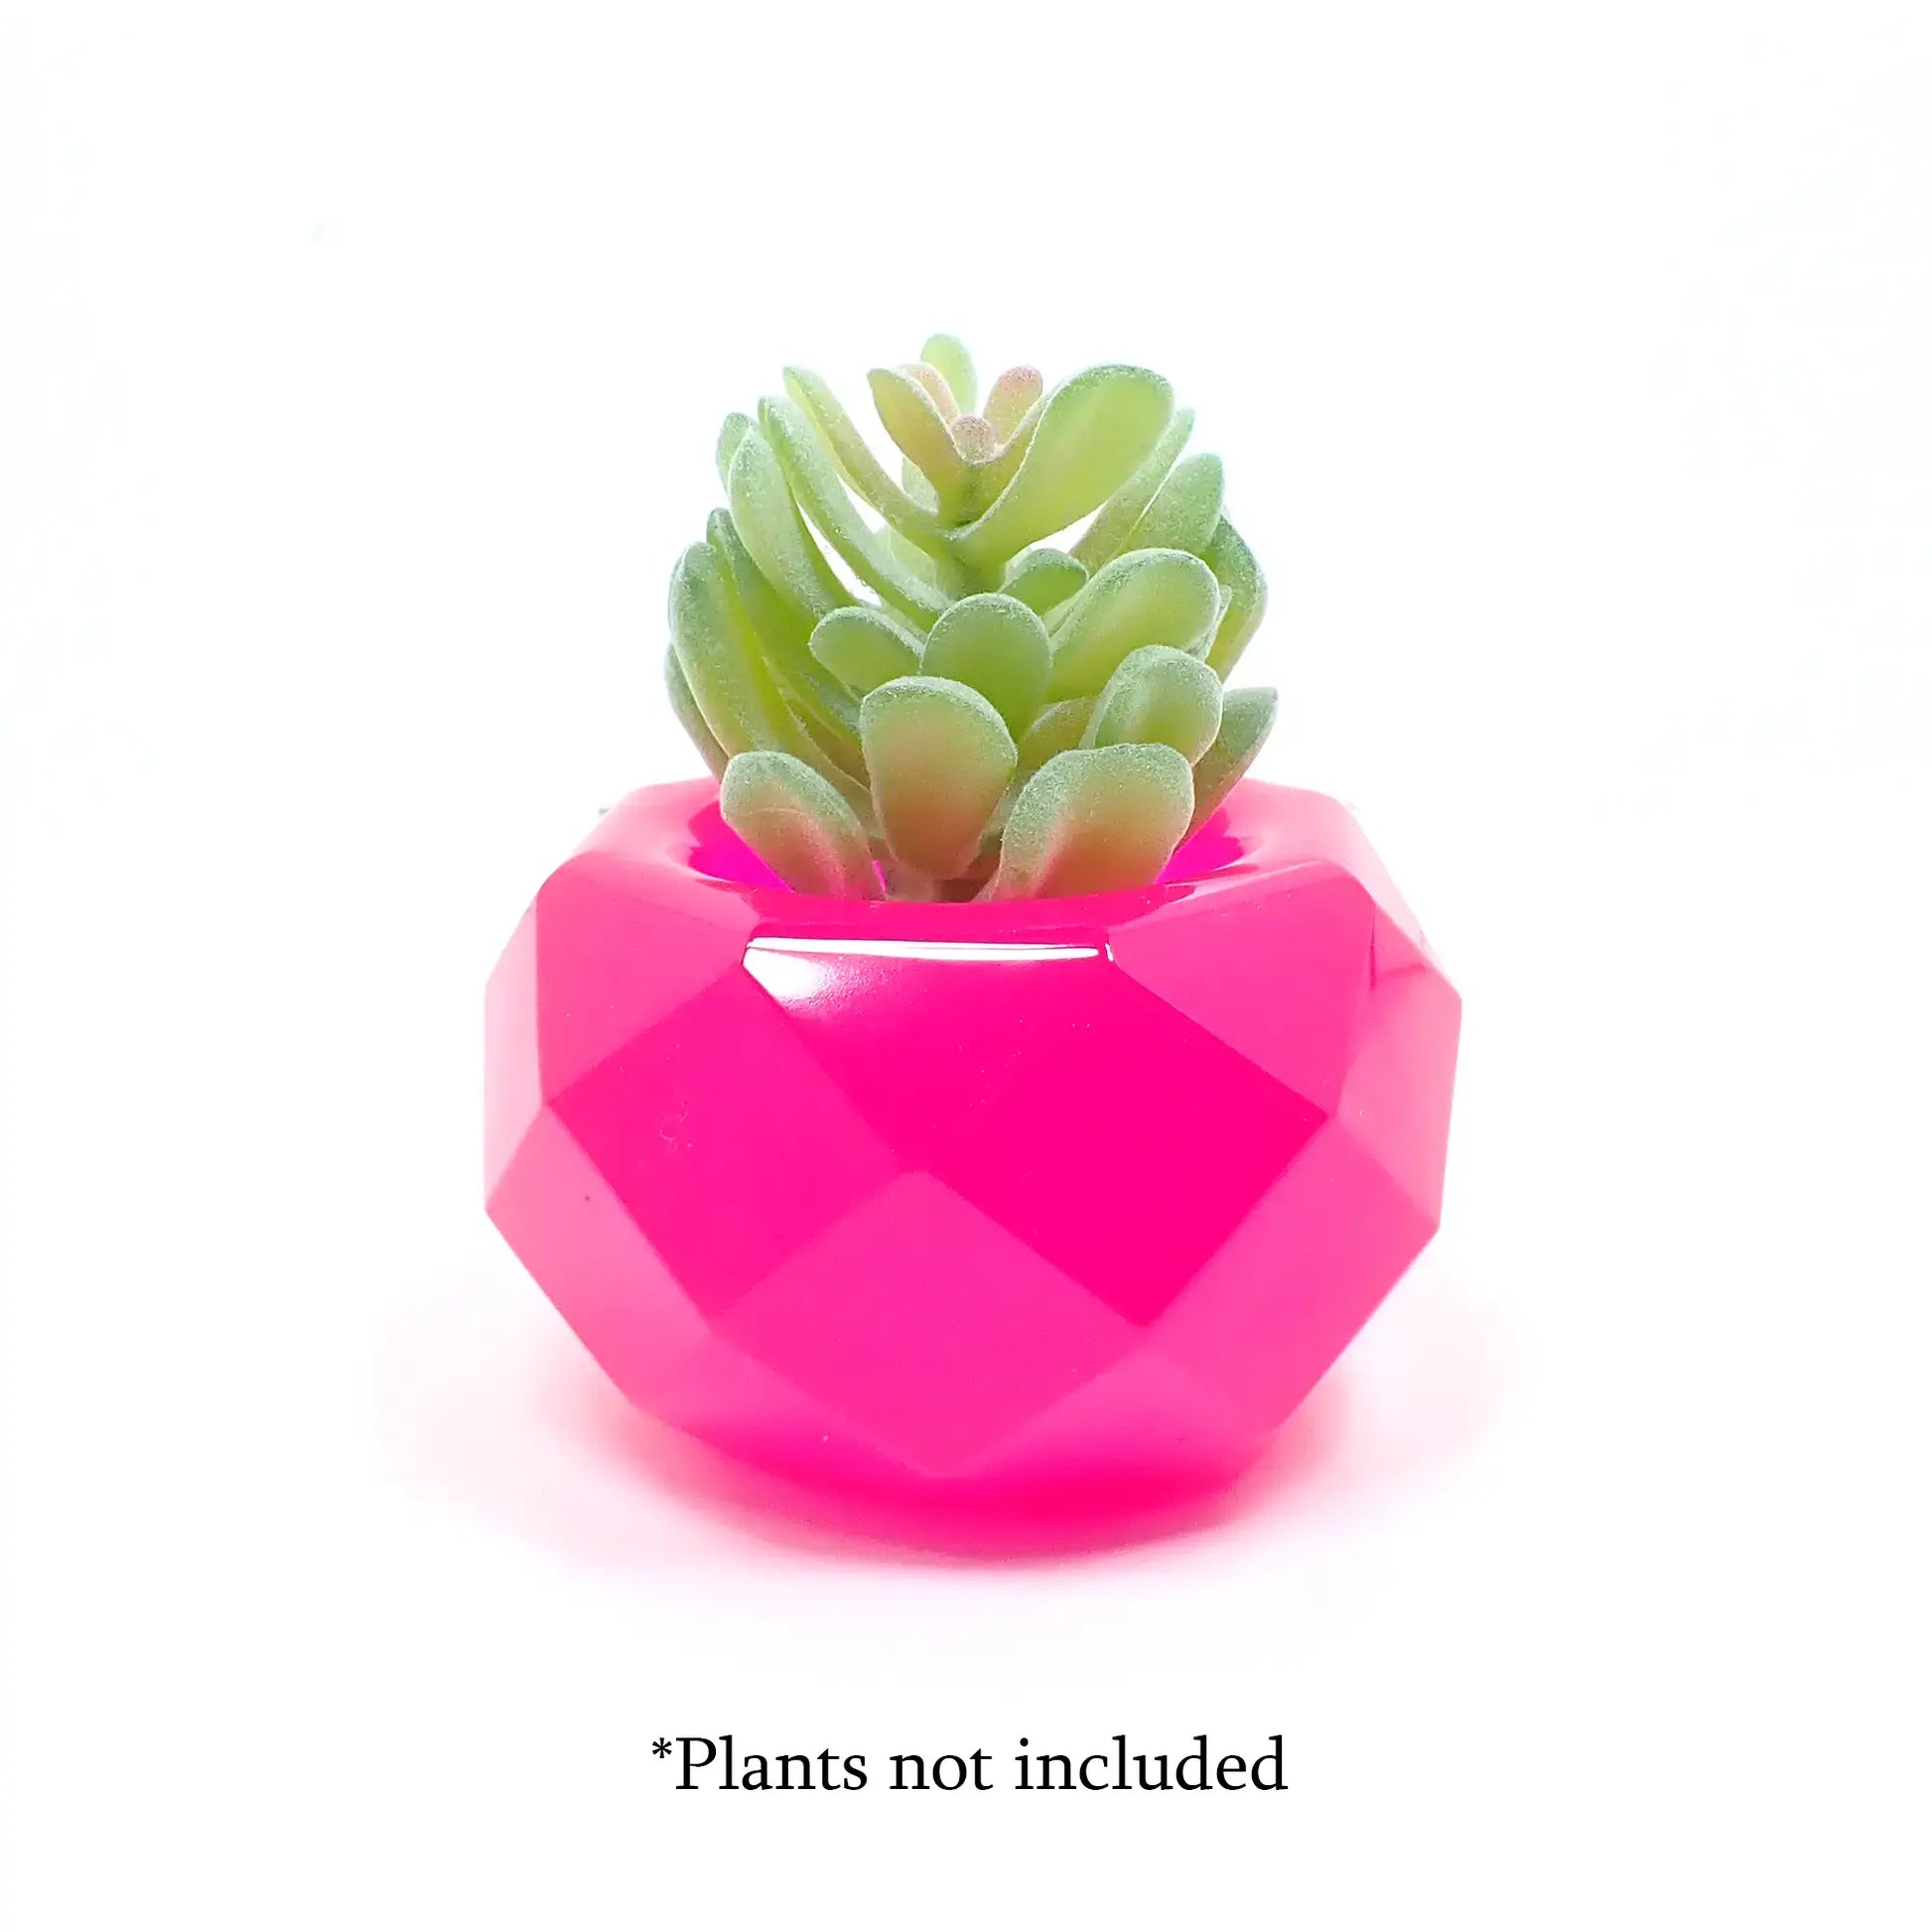 Side view of the small geometric handmade resin succulent pot showing how a small plant fits in the top. The resin is bright neon pink and there is a small fake succulent sitting on top. At the bottom of the photo are the words "Plants not included."